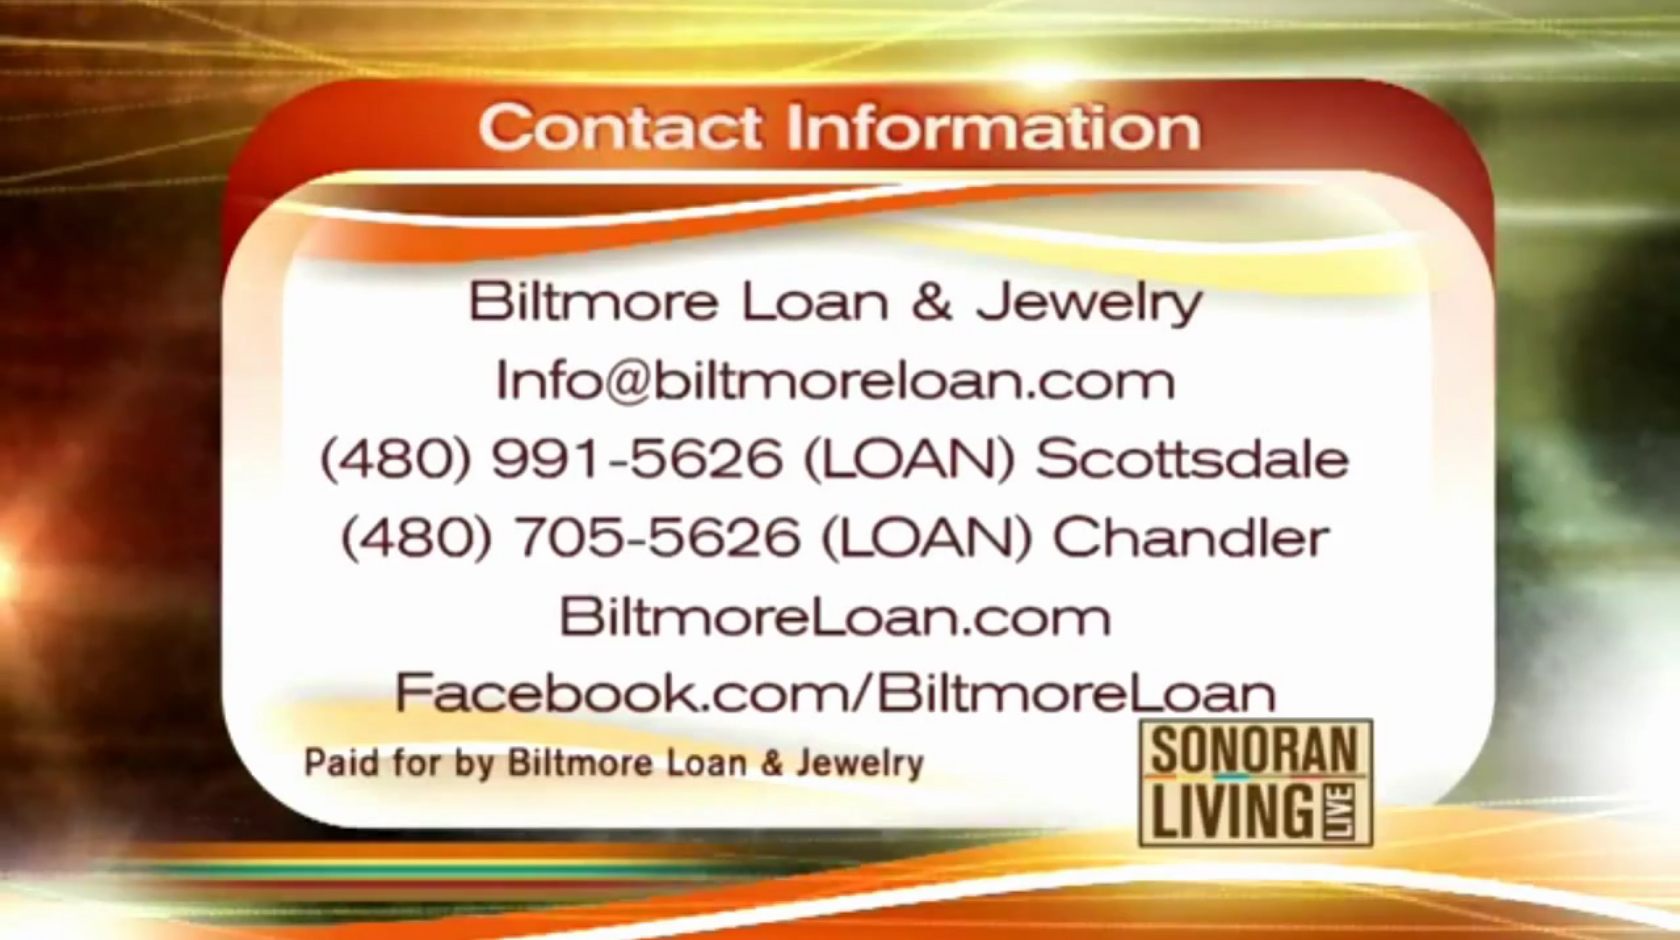 Biltmore Loan and Jewelry Contact Information